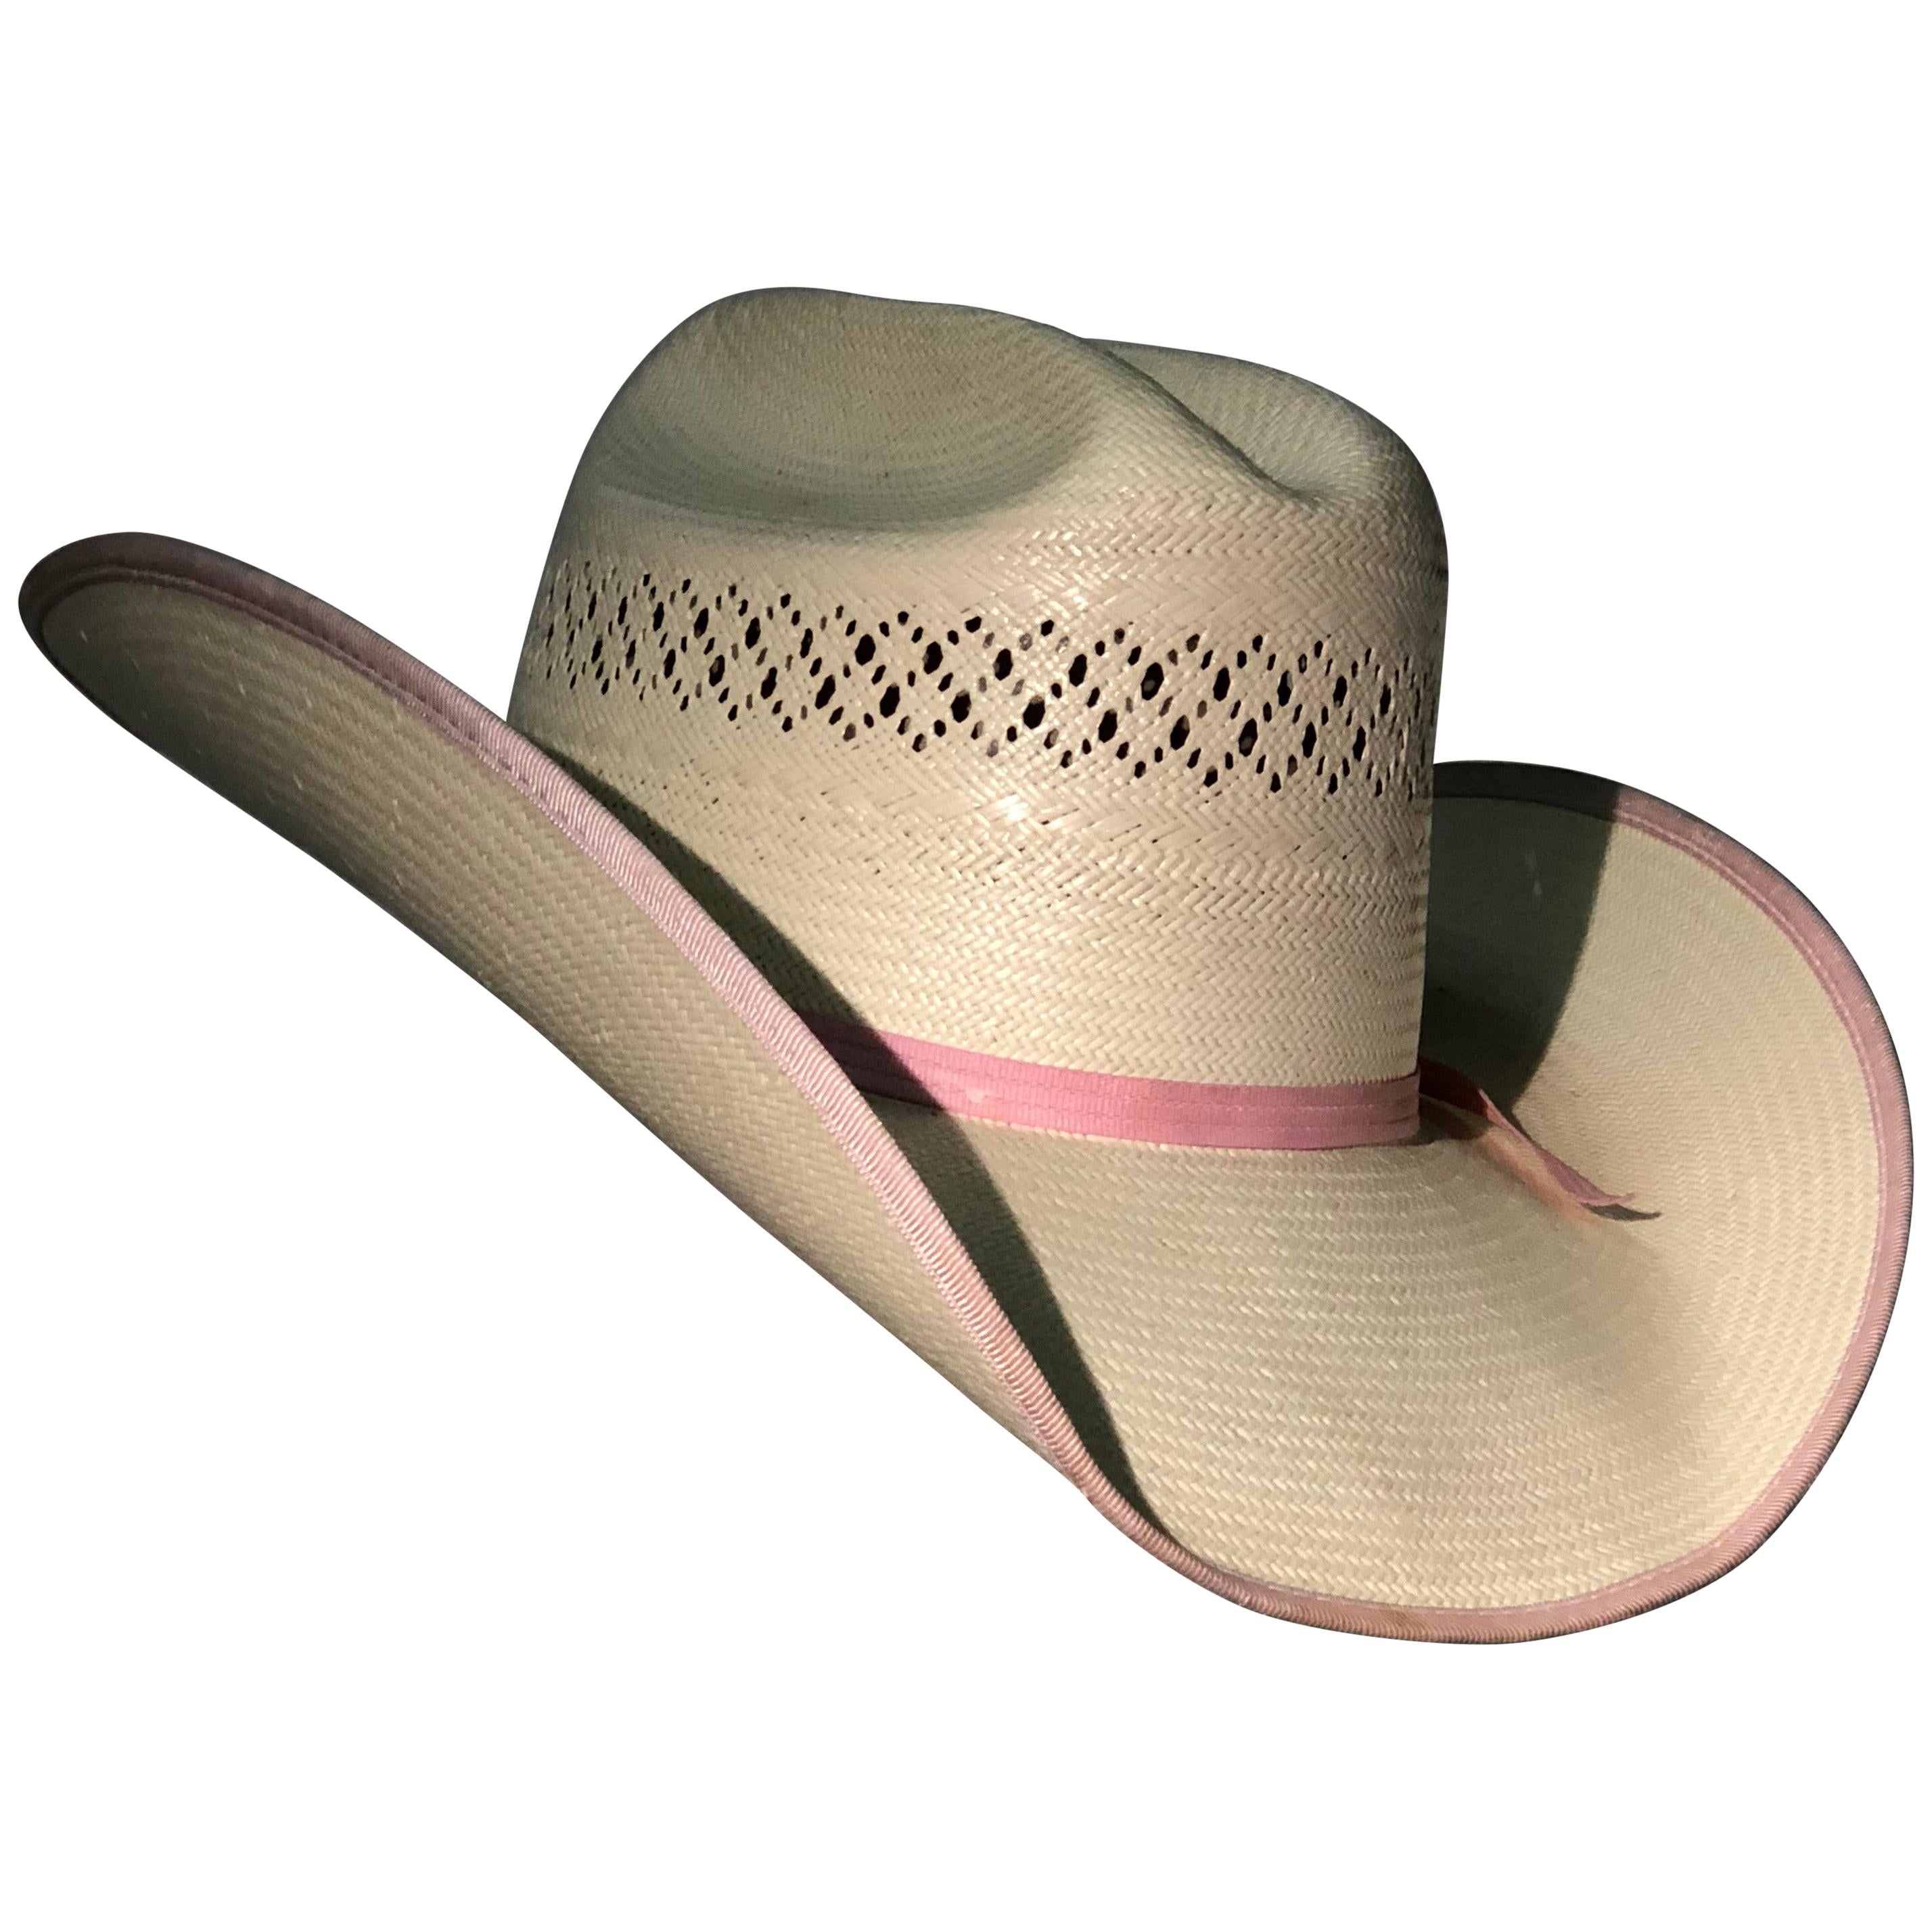 1980s Tony Lama Structured Straw Cowgirl Hat W/ Pink Ribbon Edging & Band For Sale